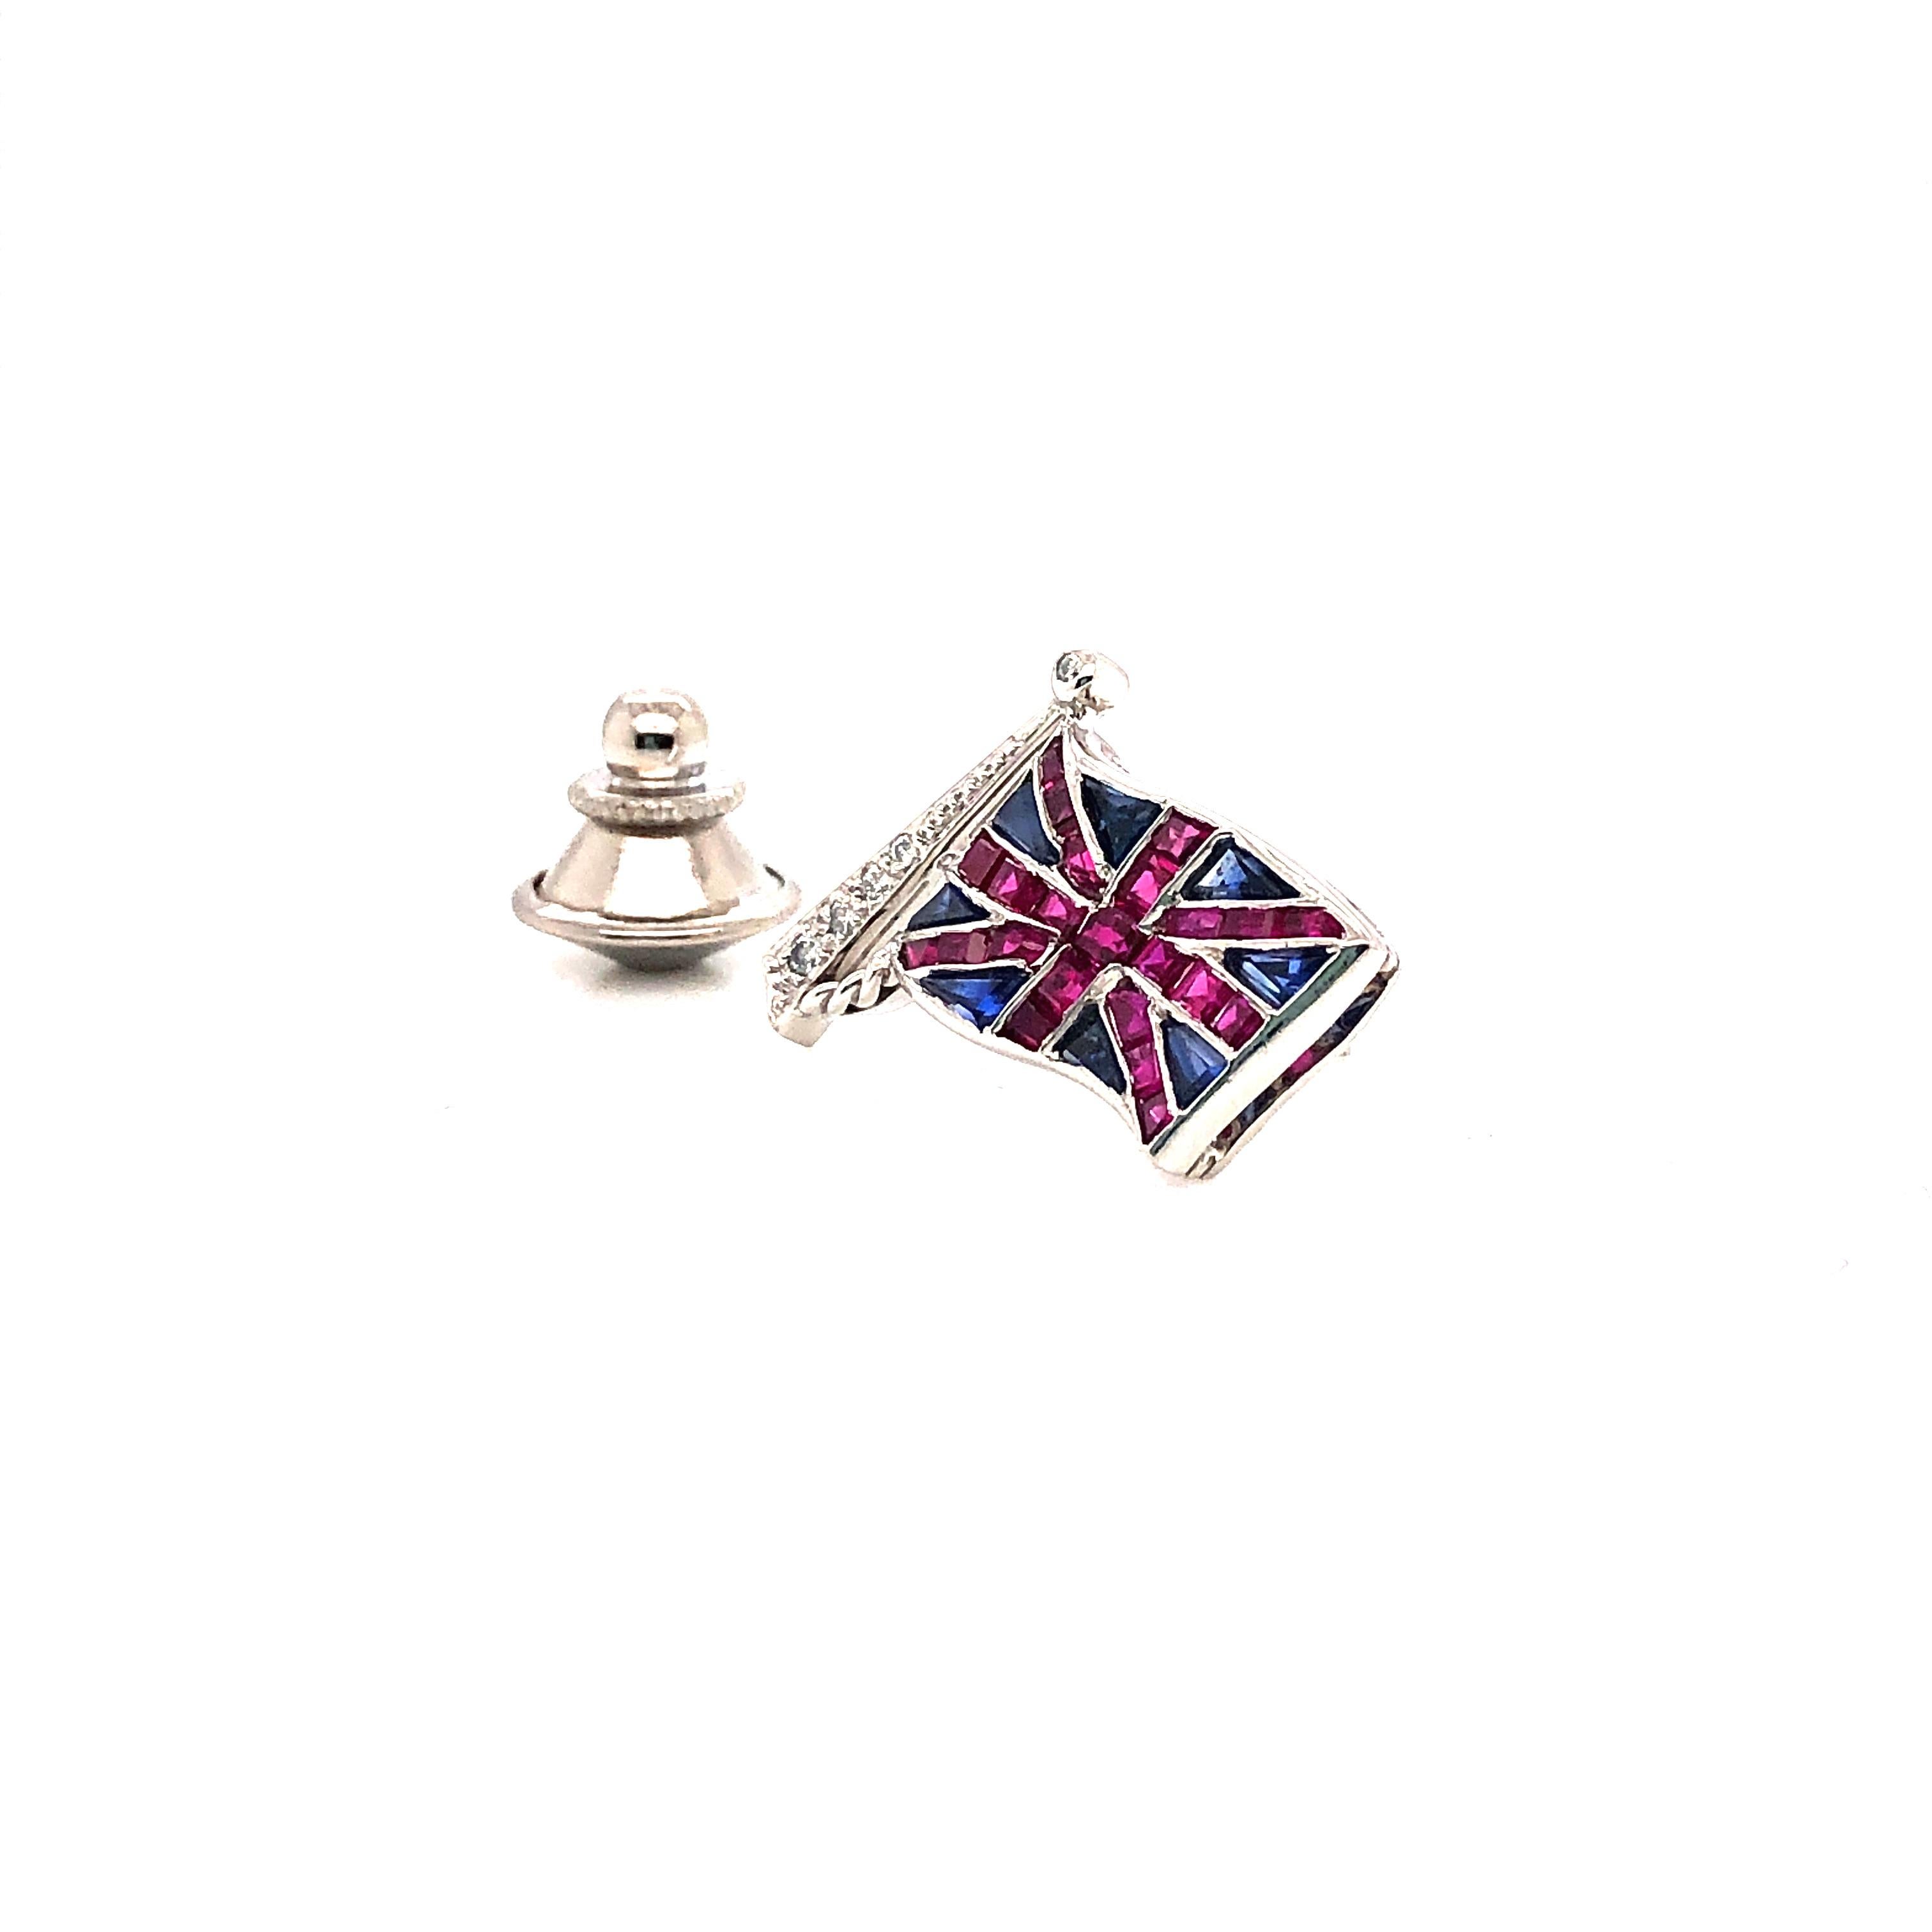 Oscar Heyman platinum Union Jack flag brooch contains rubies (0.76cts), sapphires (0.64cts) and diamonds (0.05cts). It is stamped with the makers mark, IRID PLAT, and serial number 902873.

Custom hand engraving available by request. Complimentary